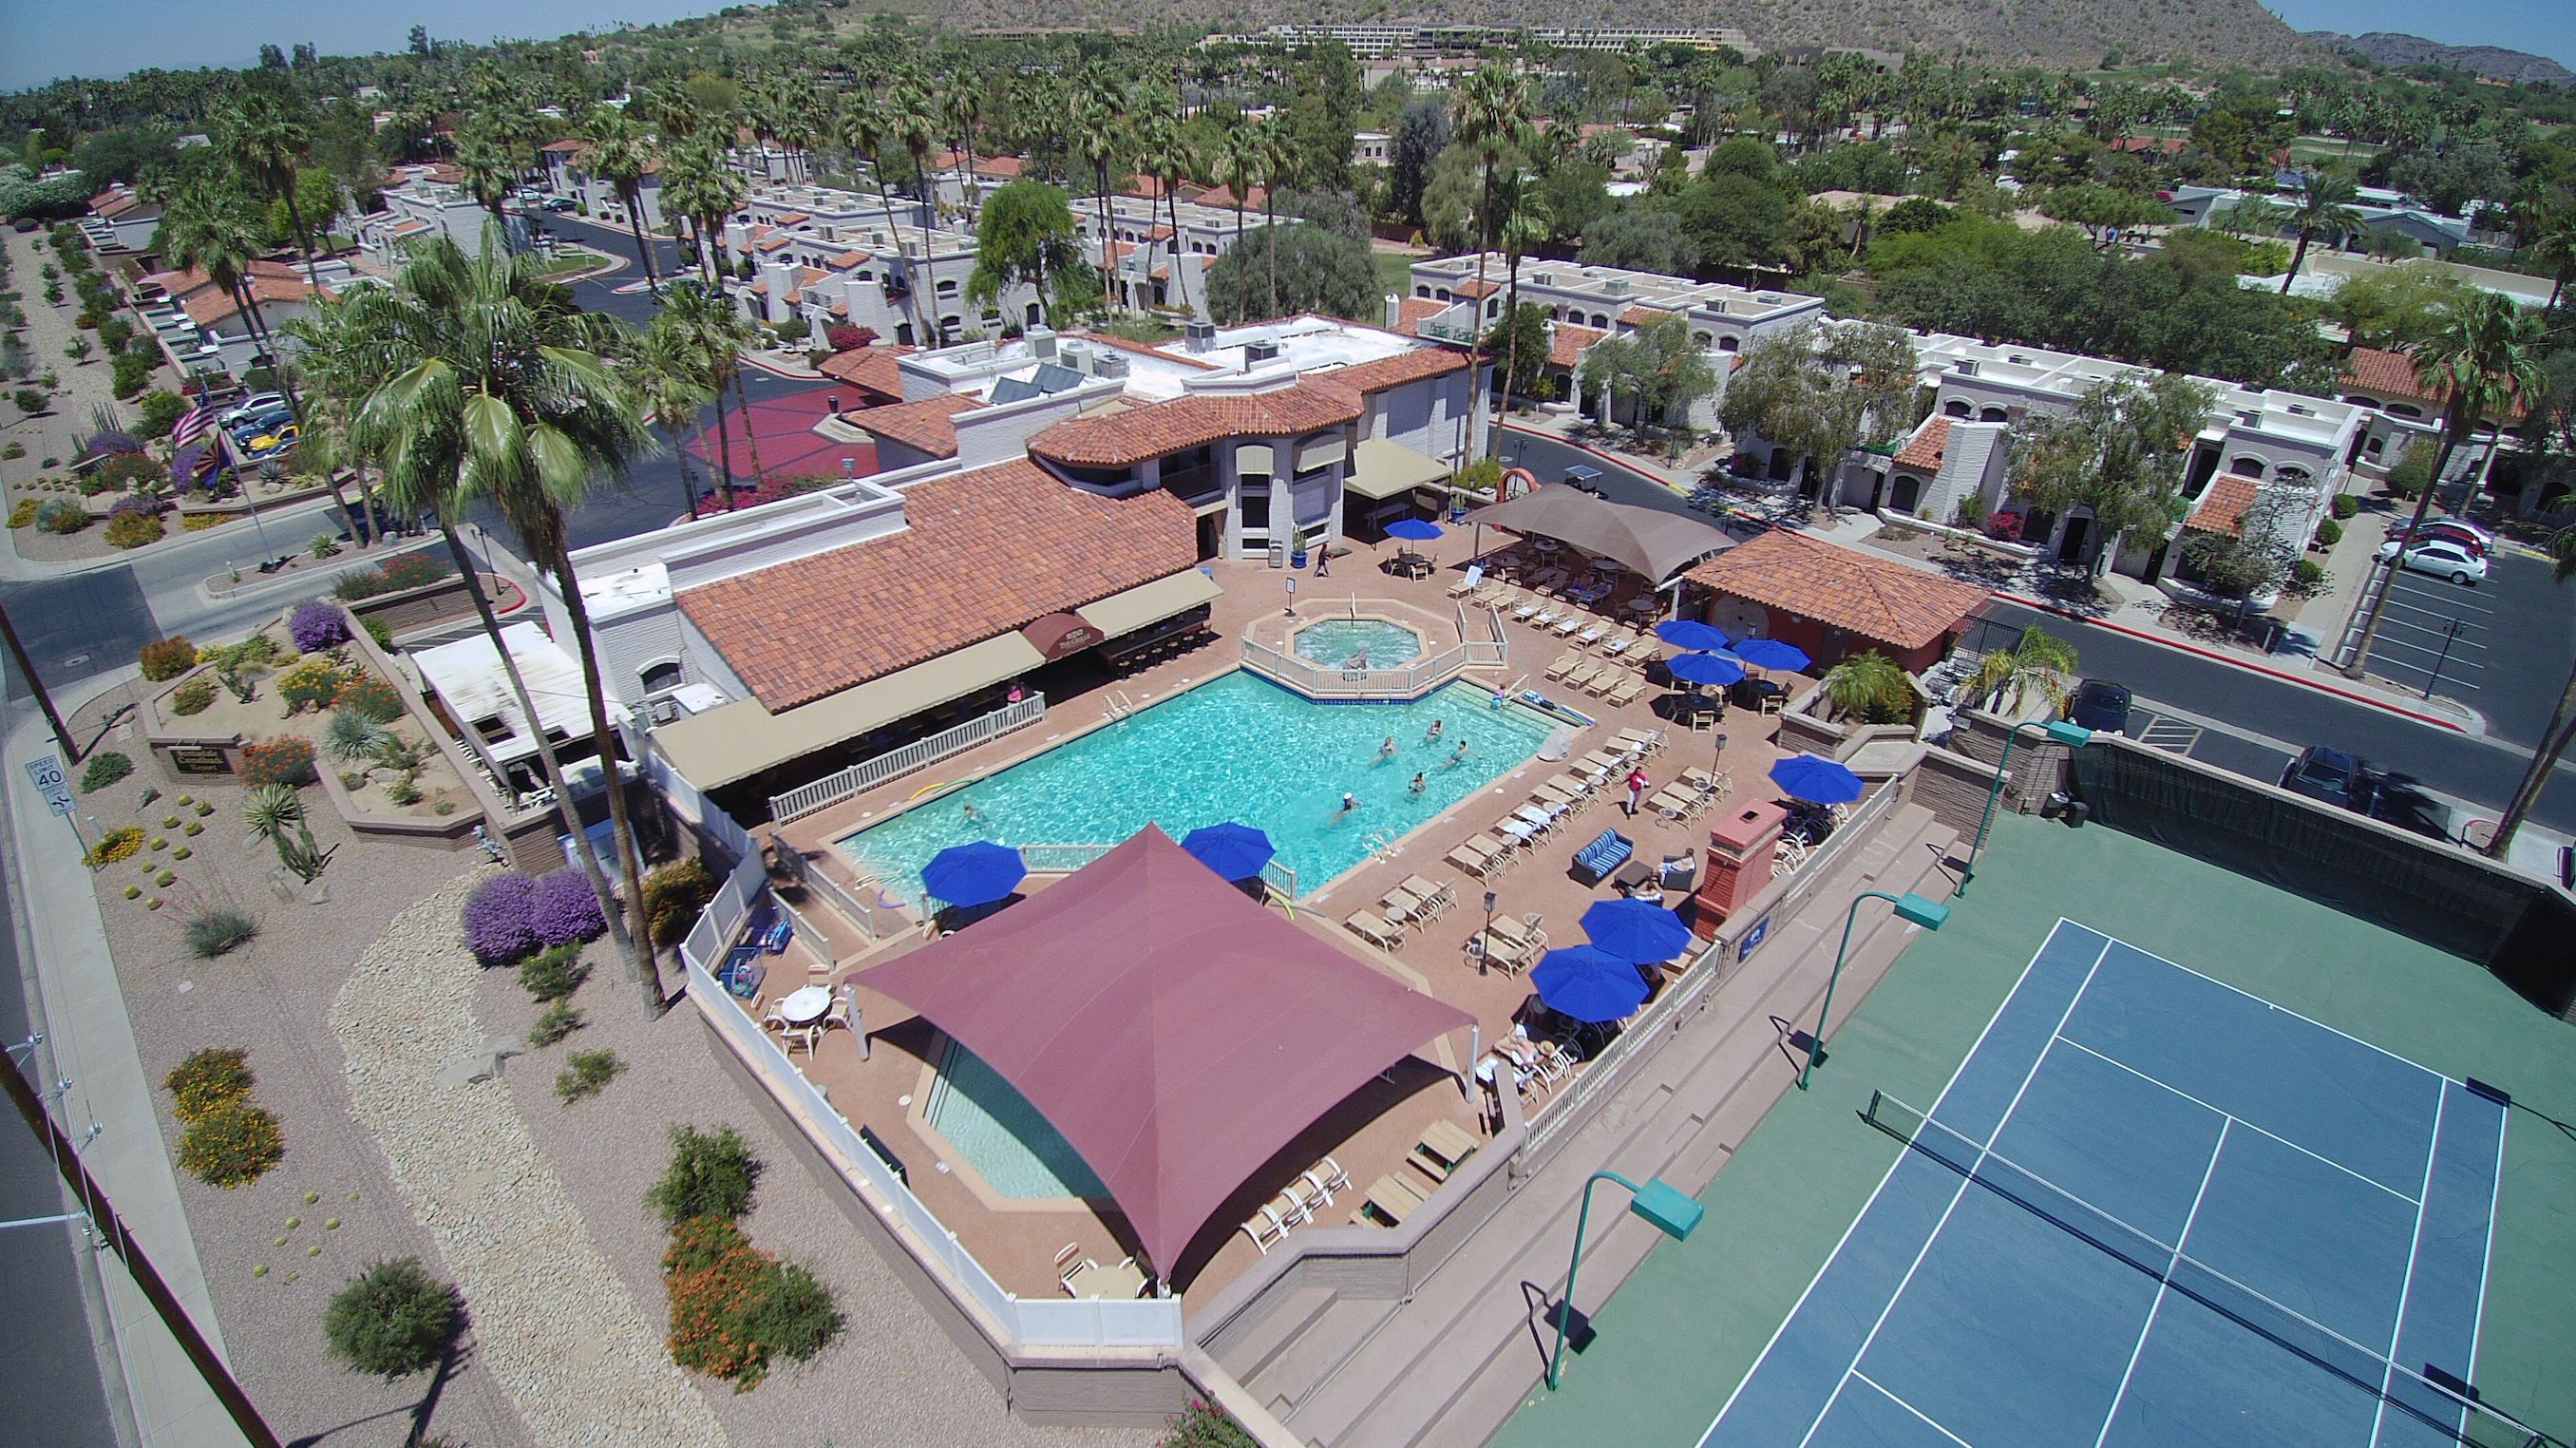 An aerial view of Scottsdale Camelback Resort, including swimming pool, tennis court, and accommodations. 